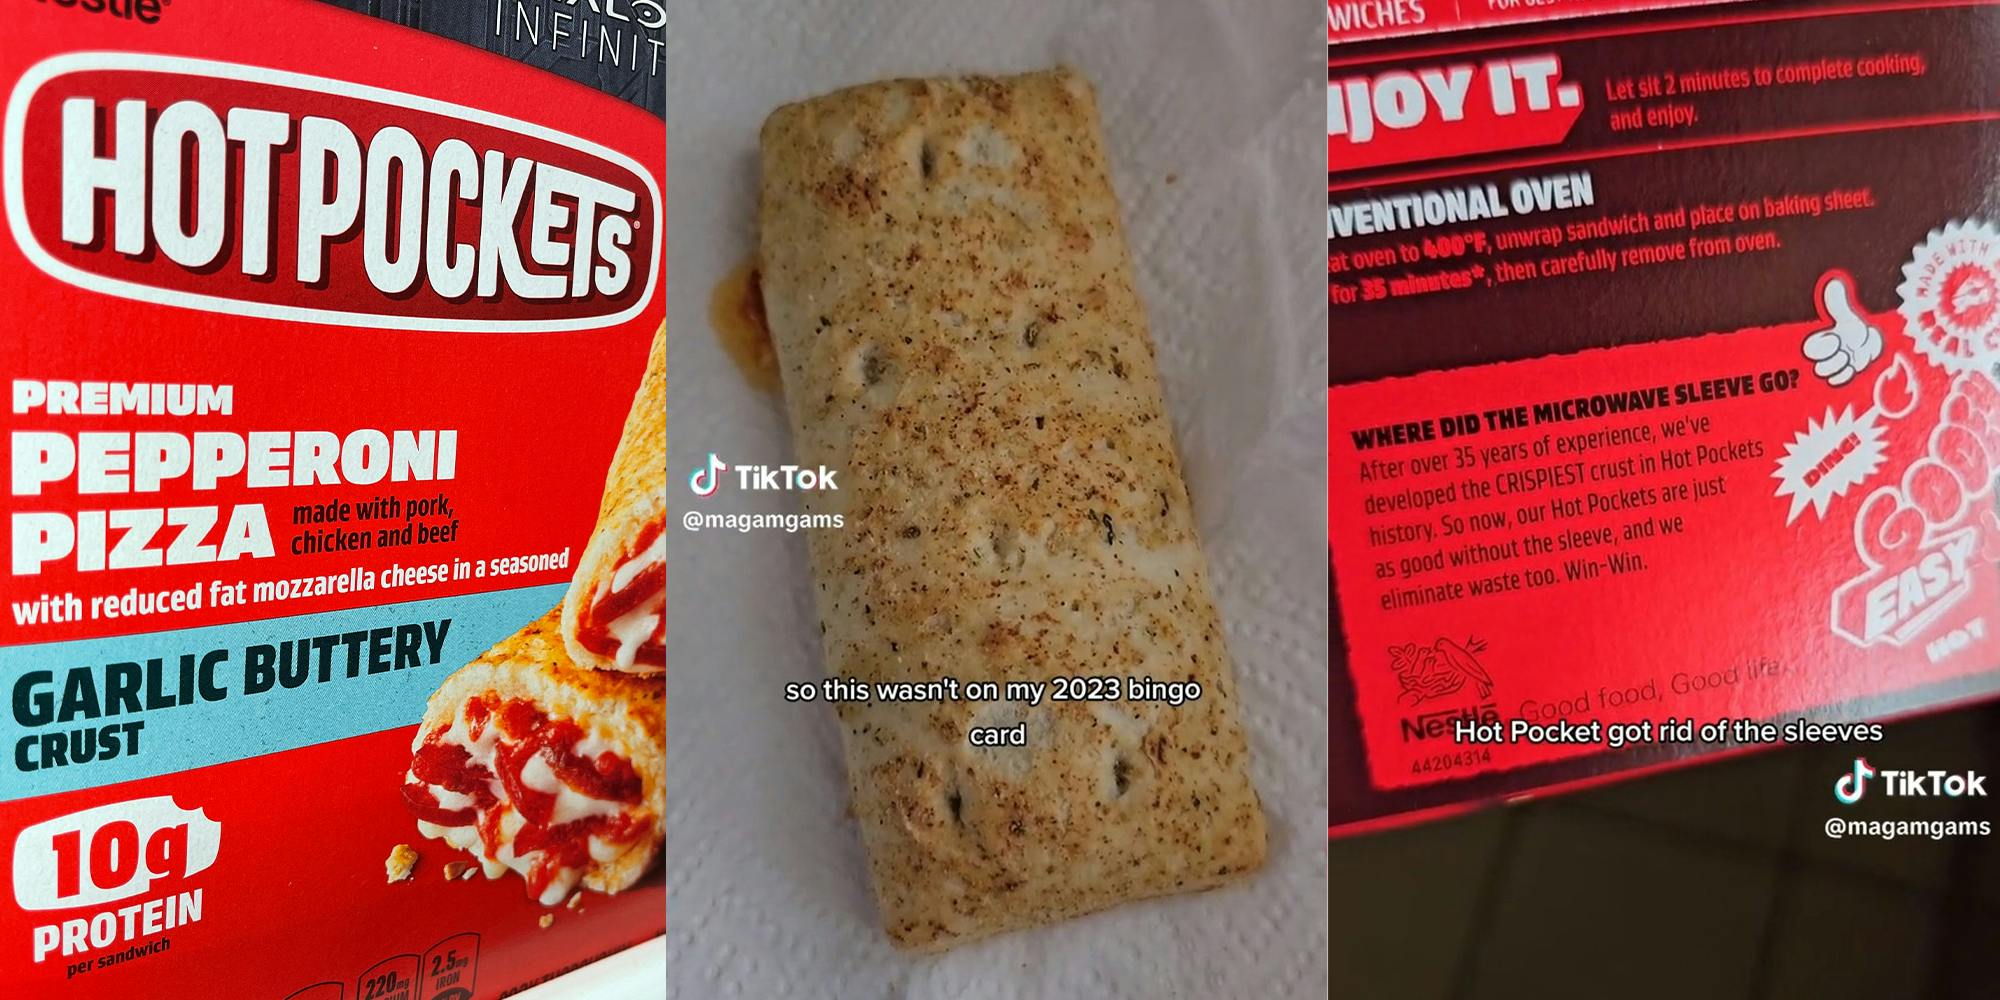 Hot Pockets remove crisping sleeve from packaging